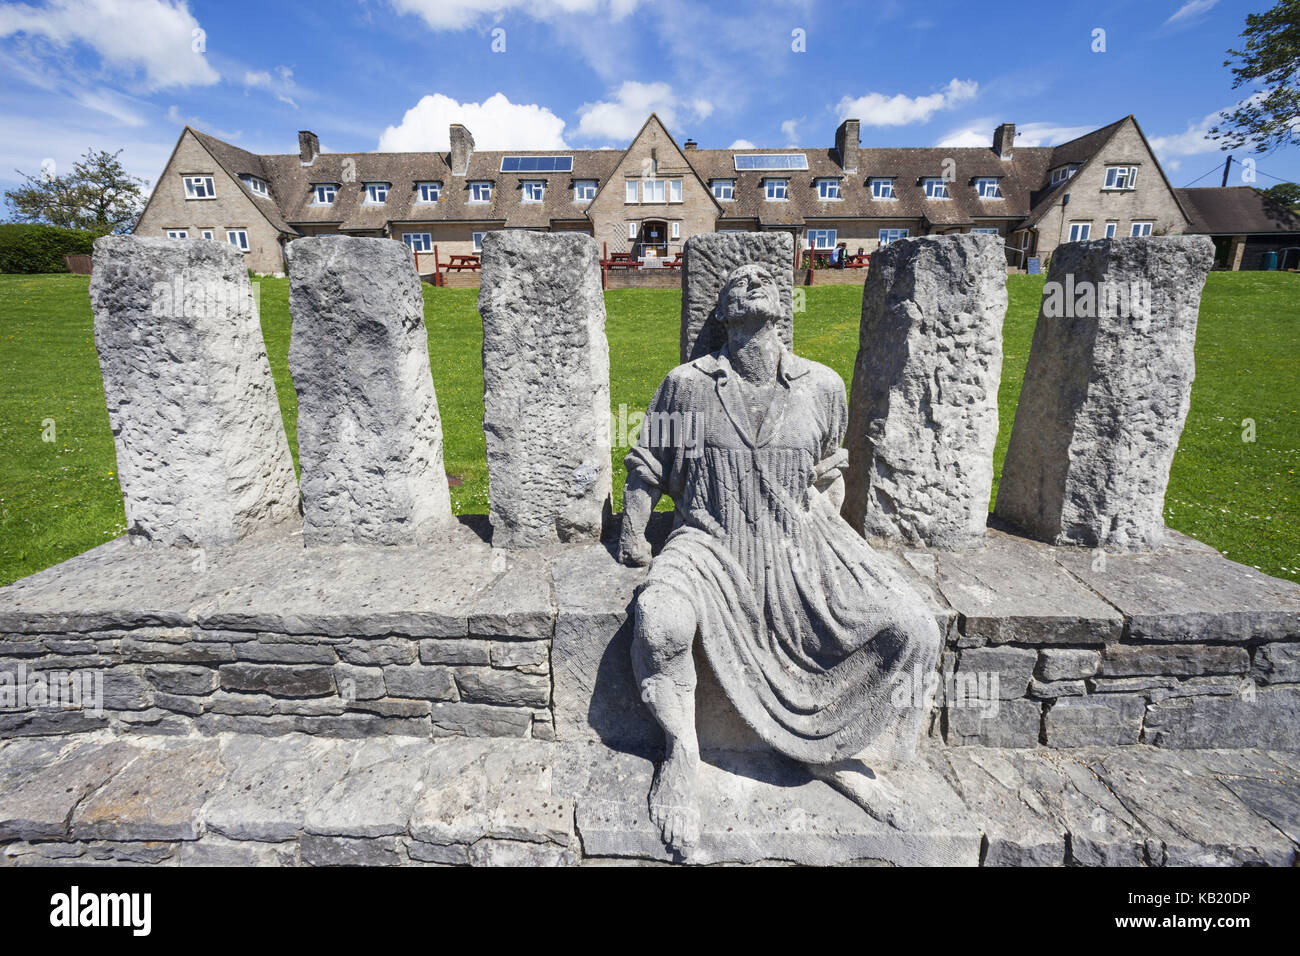 Inghilterra, Dorset, Tolpuddle, Tolpuddle Martyrs Museum, scultura, esterno, Foto Stock